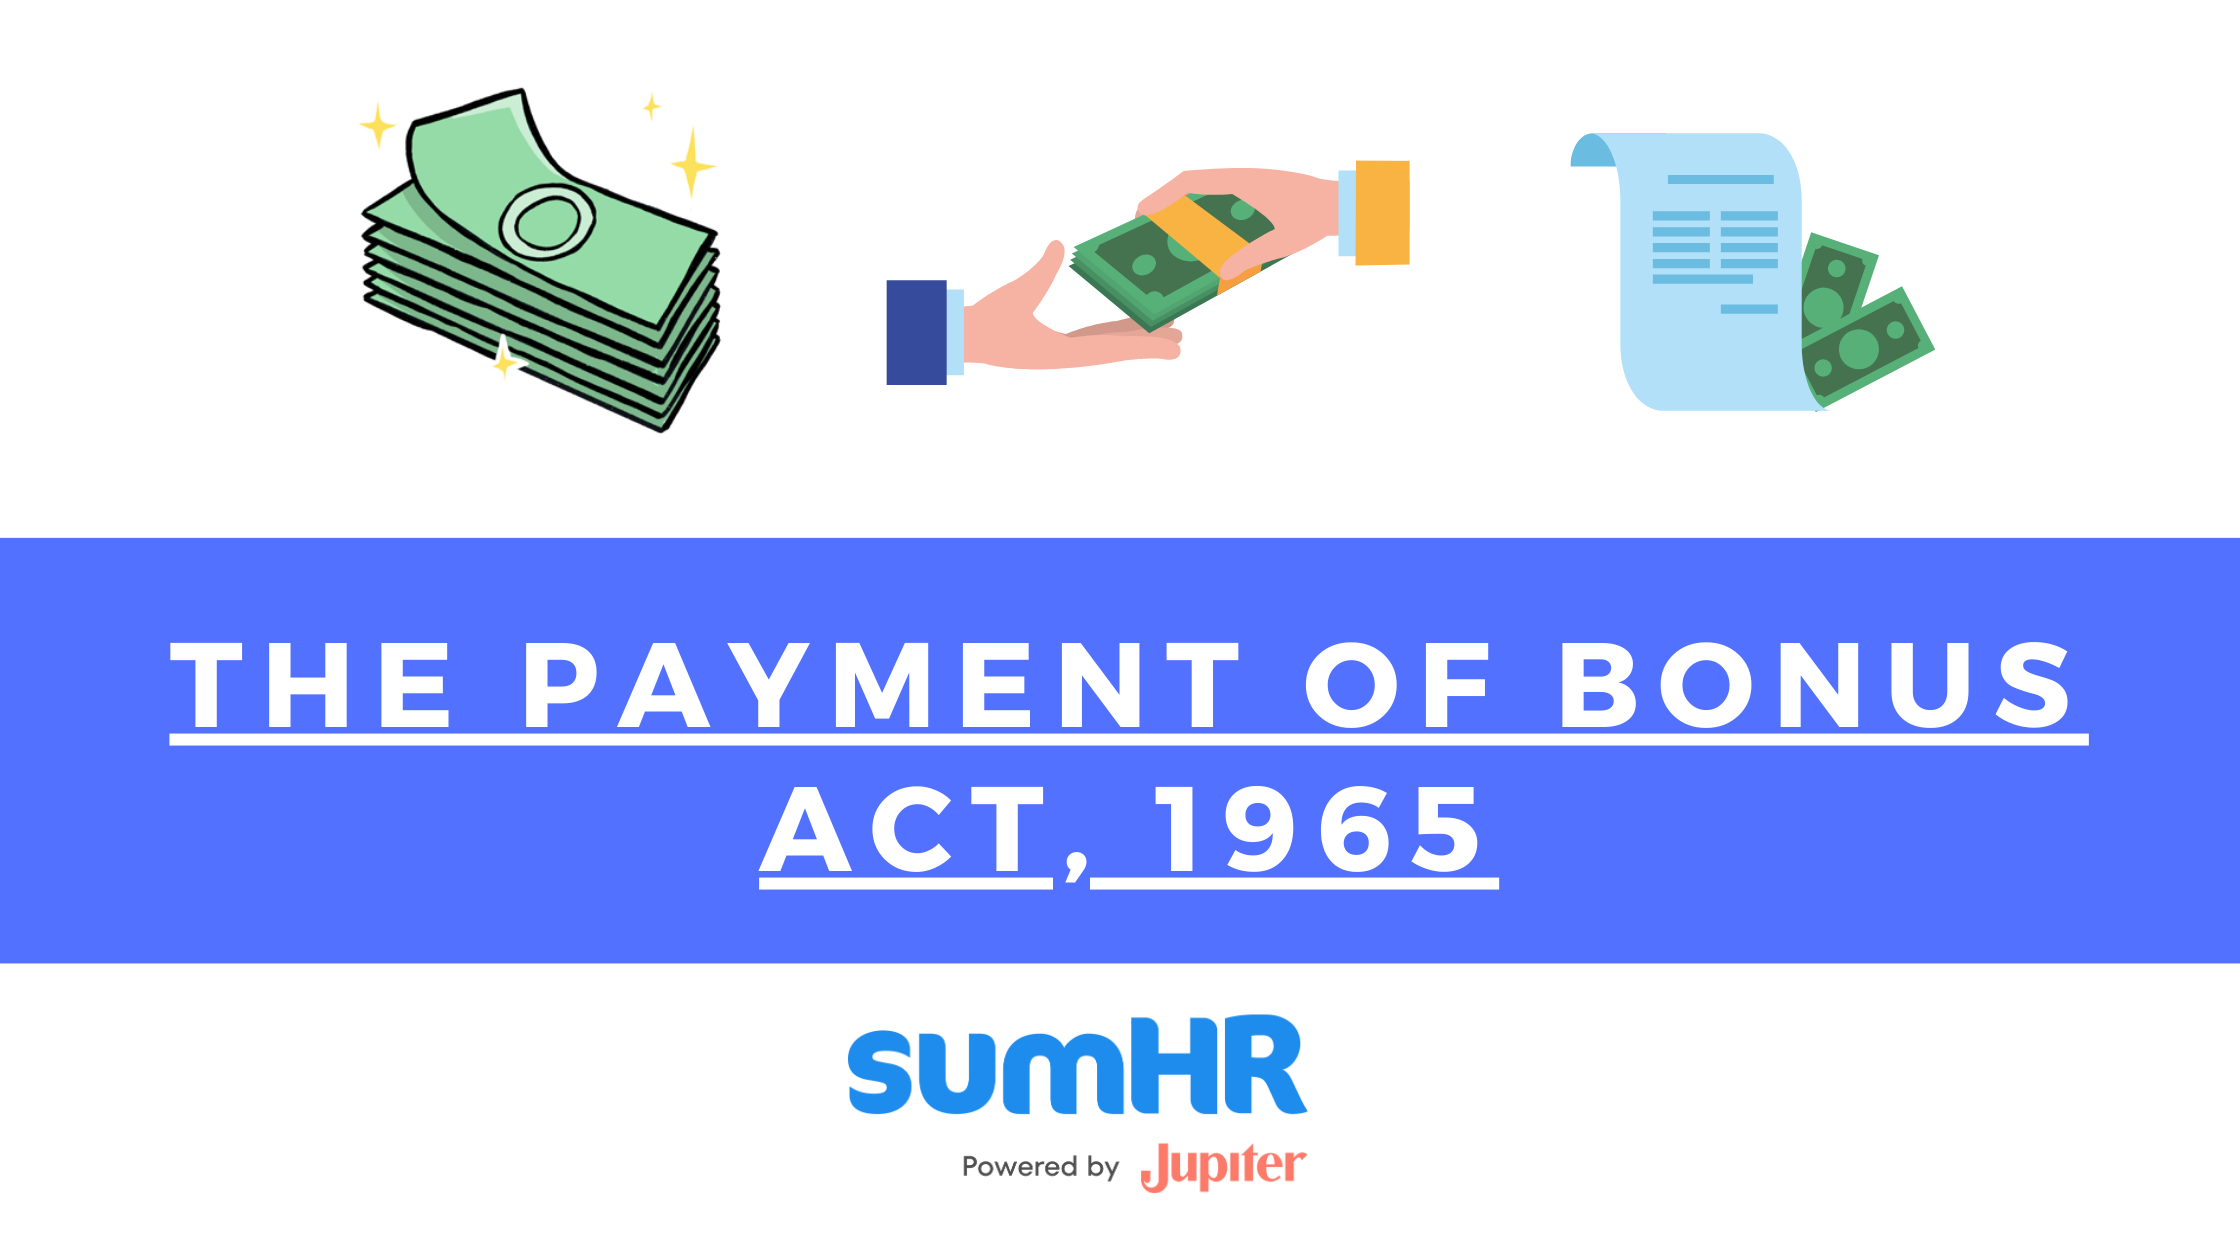 THE PAYMENT OF BONUS ACT, 1965